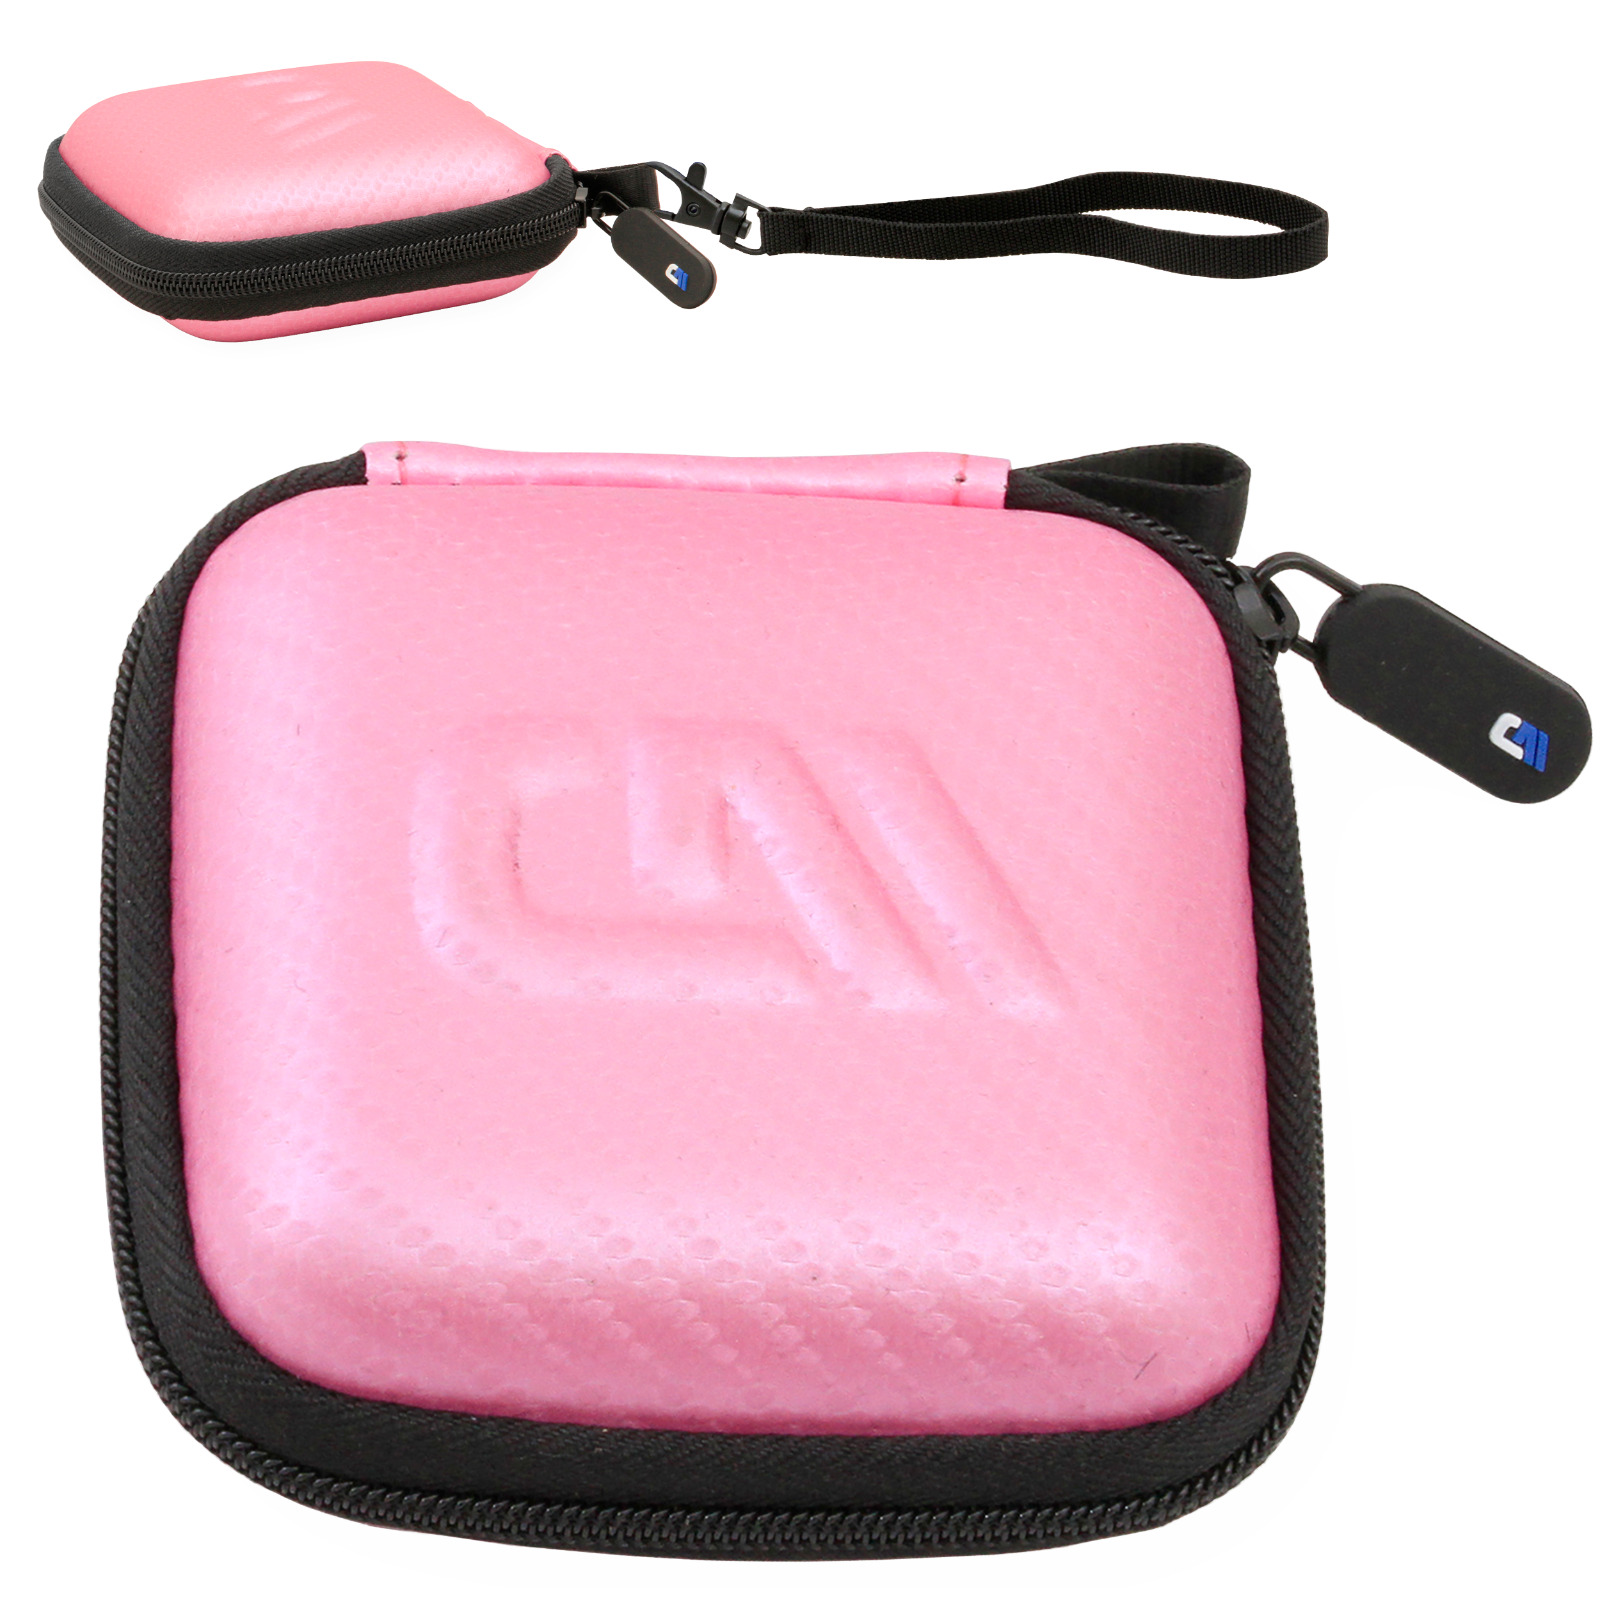 Case for Crucial X6 4TB Portable SSD External Solid State Drive Pink Case Only